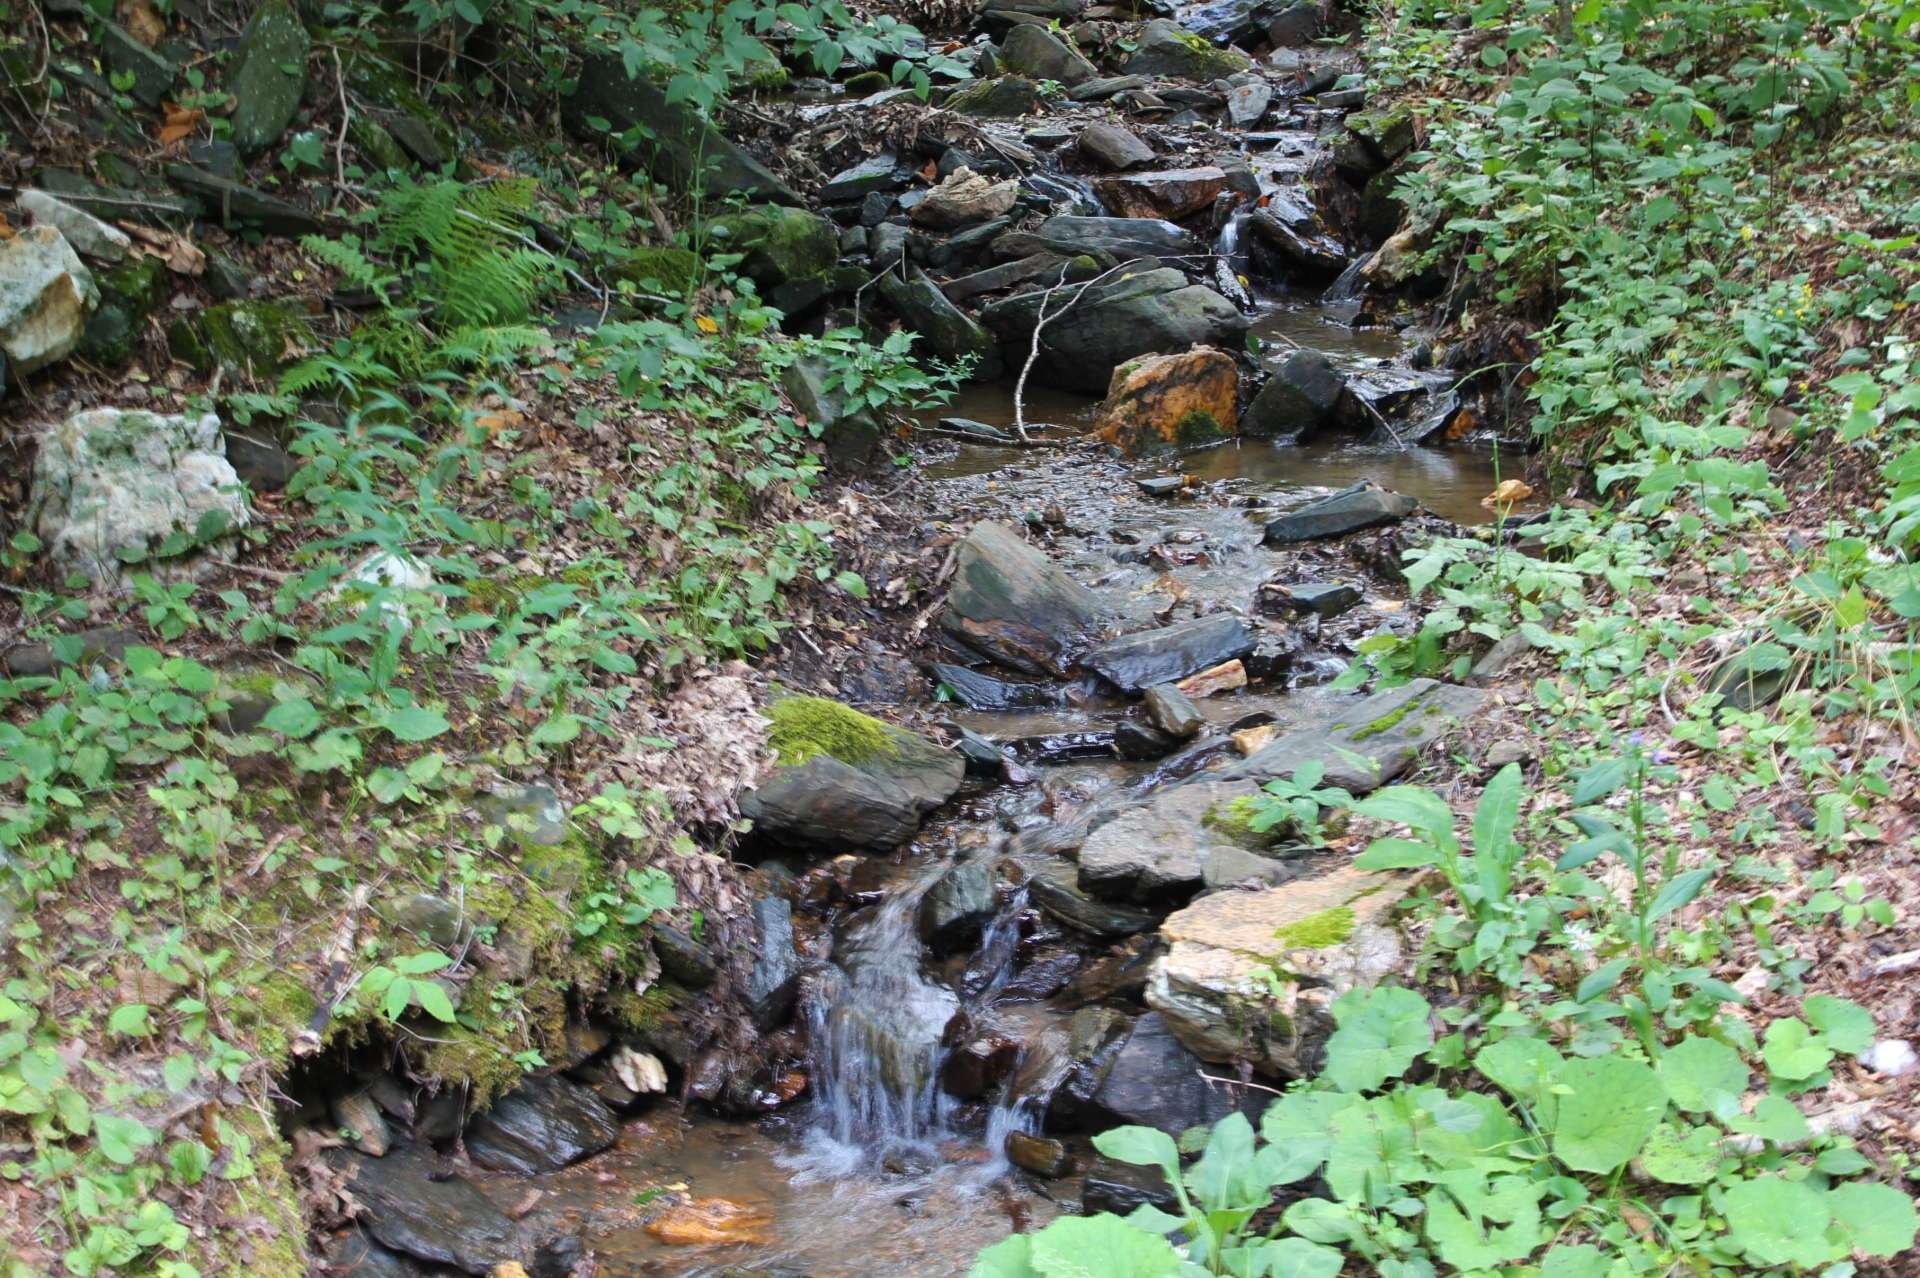 The spring fed creek offers relaxing sounds of Nature and...